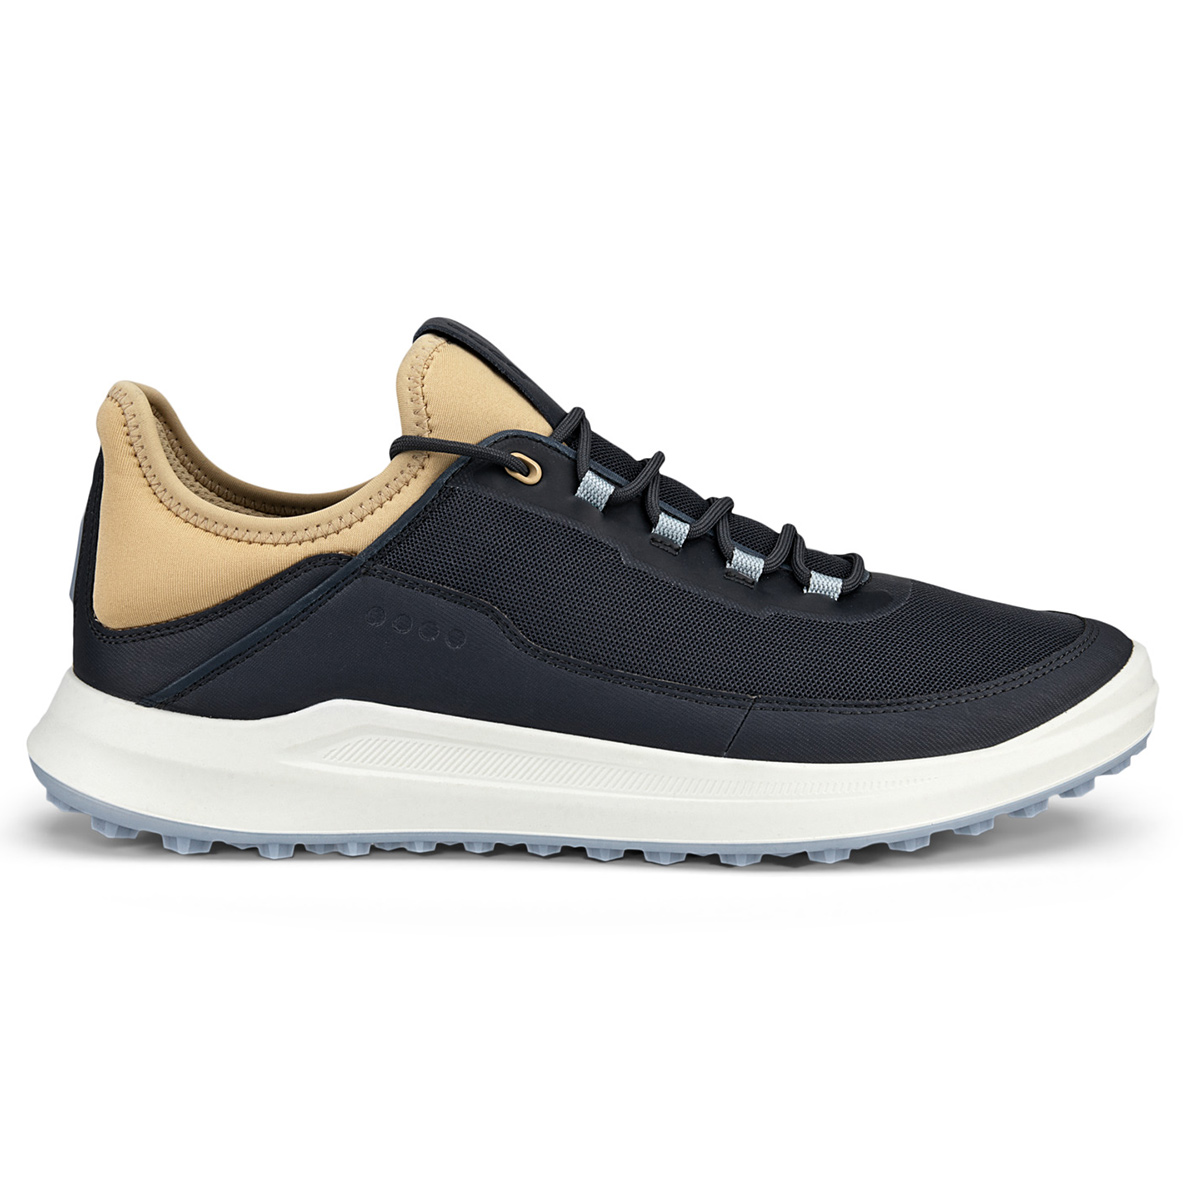 ECCO Men's Hybrid Mesh Core Spikeless Golf Shoes from american golf